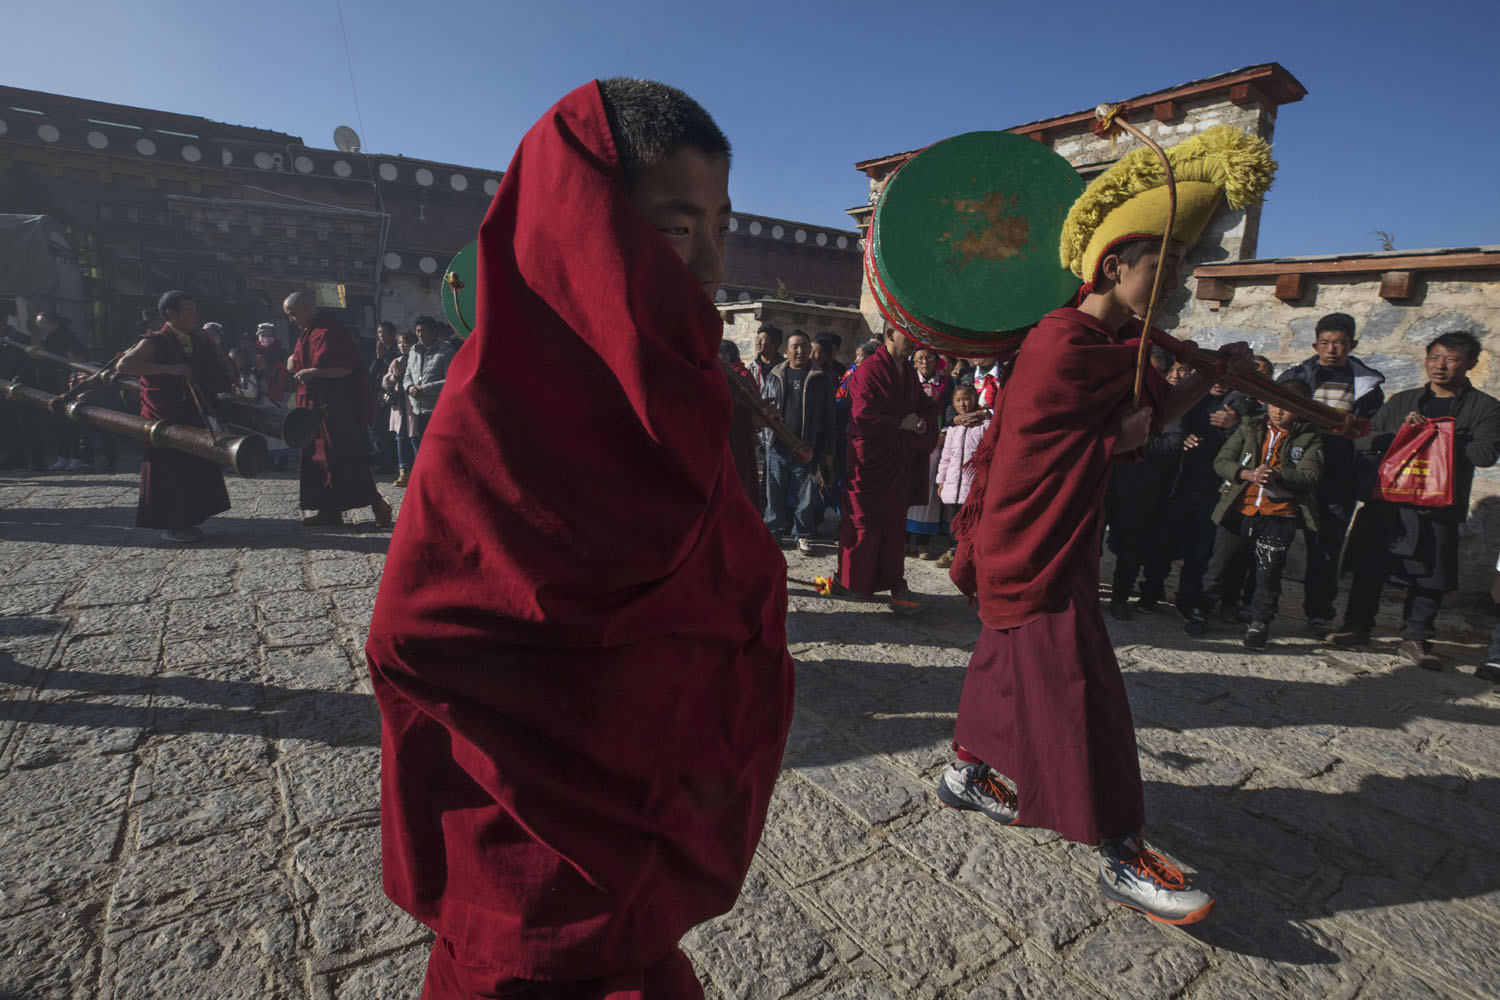 Tibetan Buddhist monks carry instruments at the start of the parade that travels through JingXiang Village, at SongZangLin Monastery. Yunnan, China. March 2, 2018.